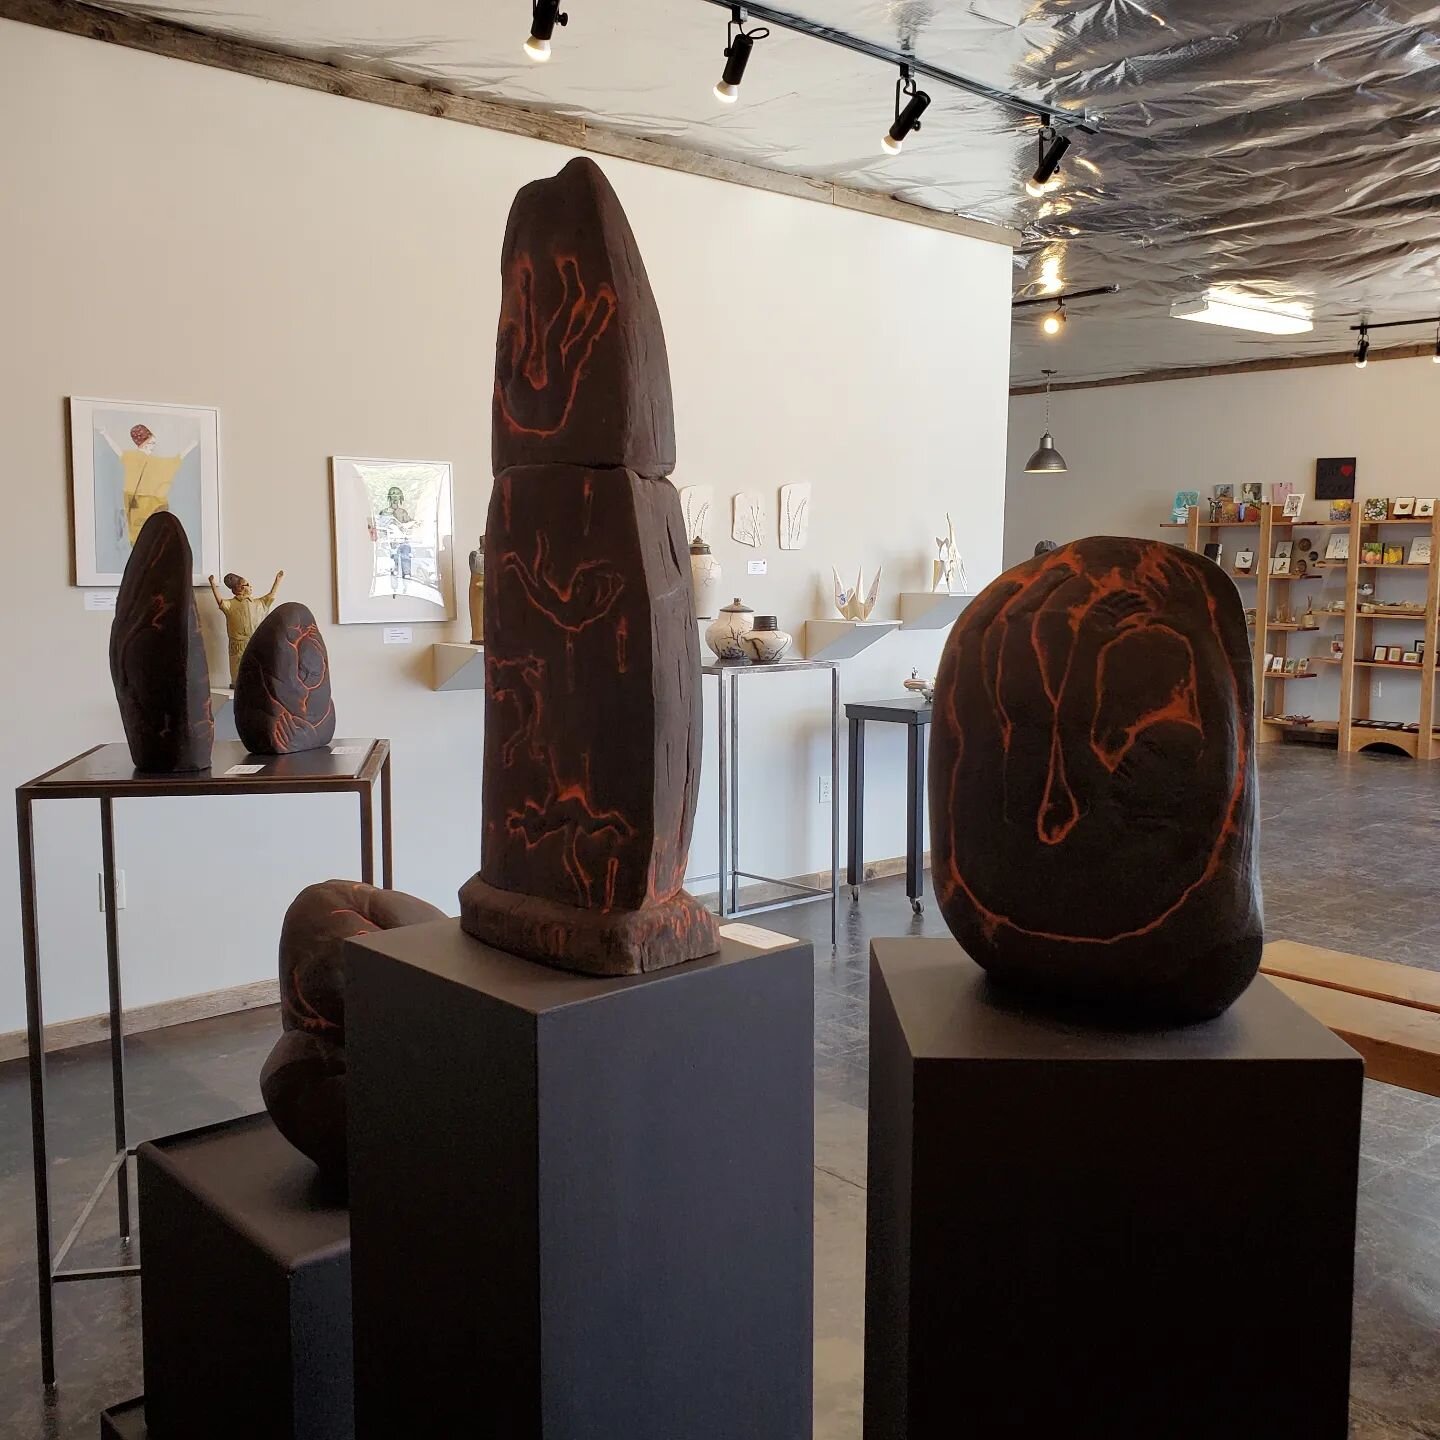 Now at Boxx Gallery! 8 of my sculptures - the new Freefall Series and new works in the Who We Are Series - are showing along with wonderful works by 8 Yakima area ceramic artists.

The opening day included demos and the first annual Great Cylinder Th